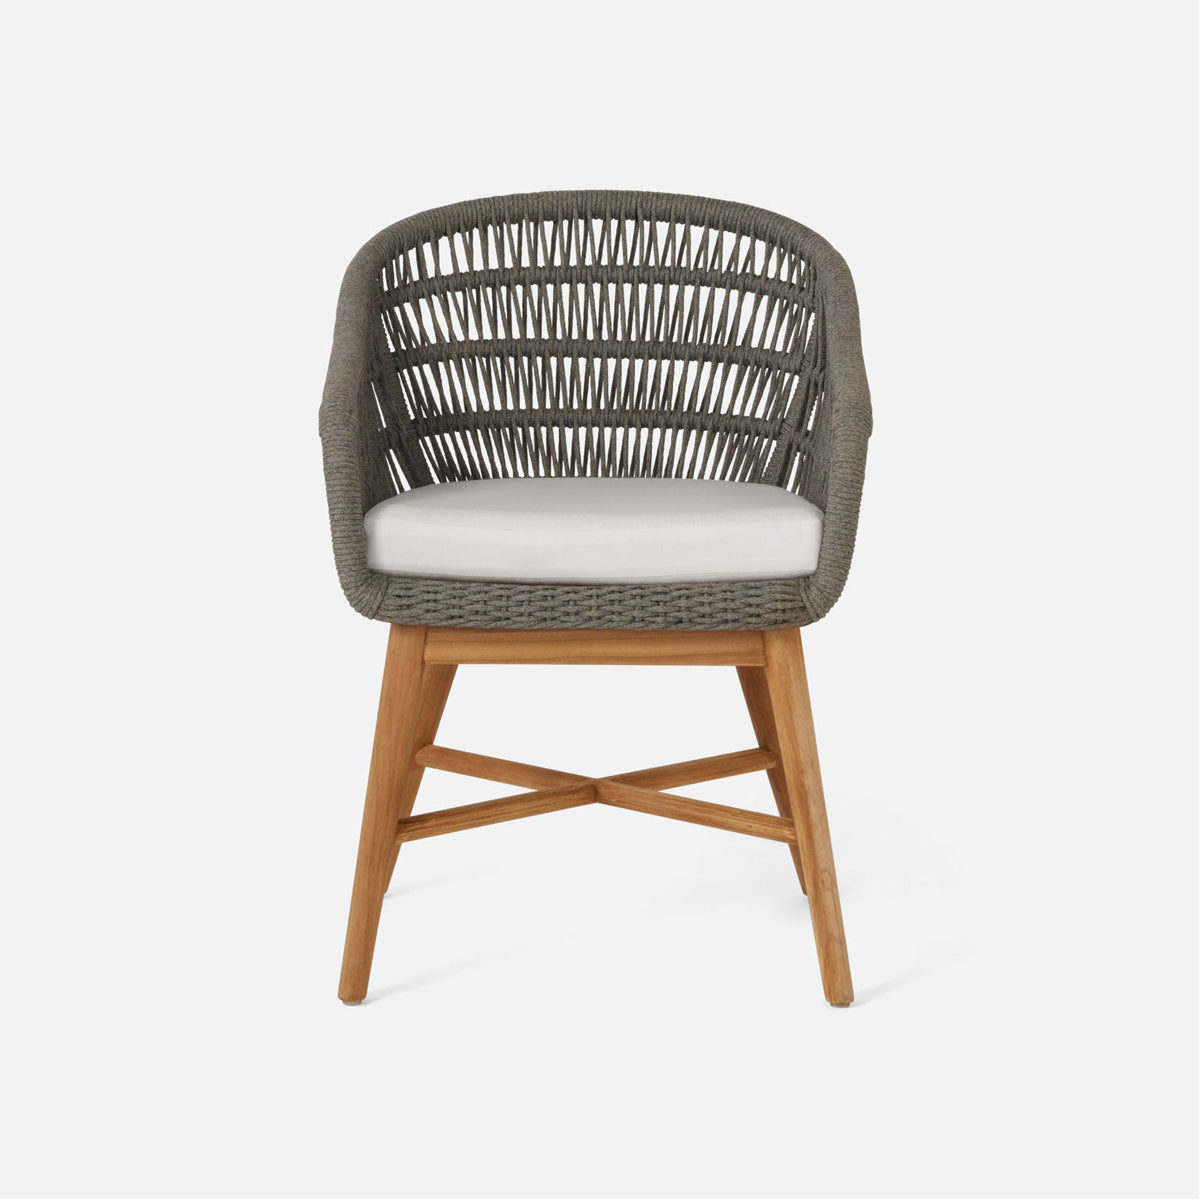 Made Goods Jolie Teak Outdoor Dining Chair in Clyde Fabric